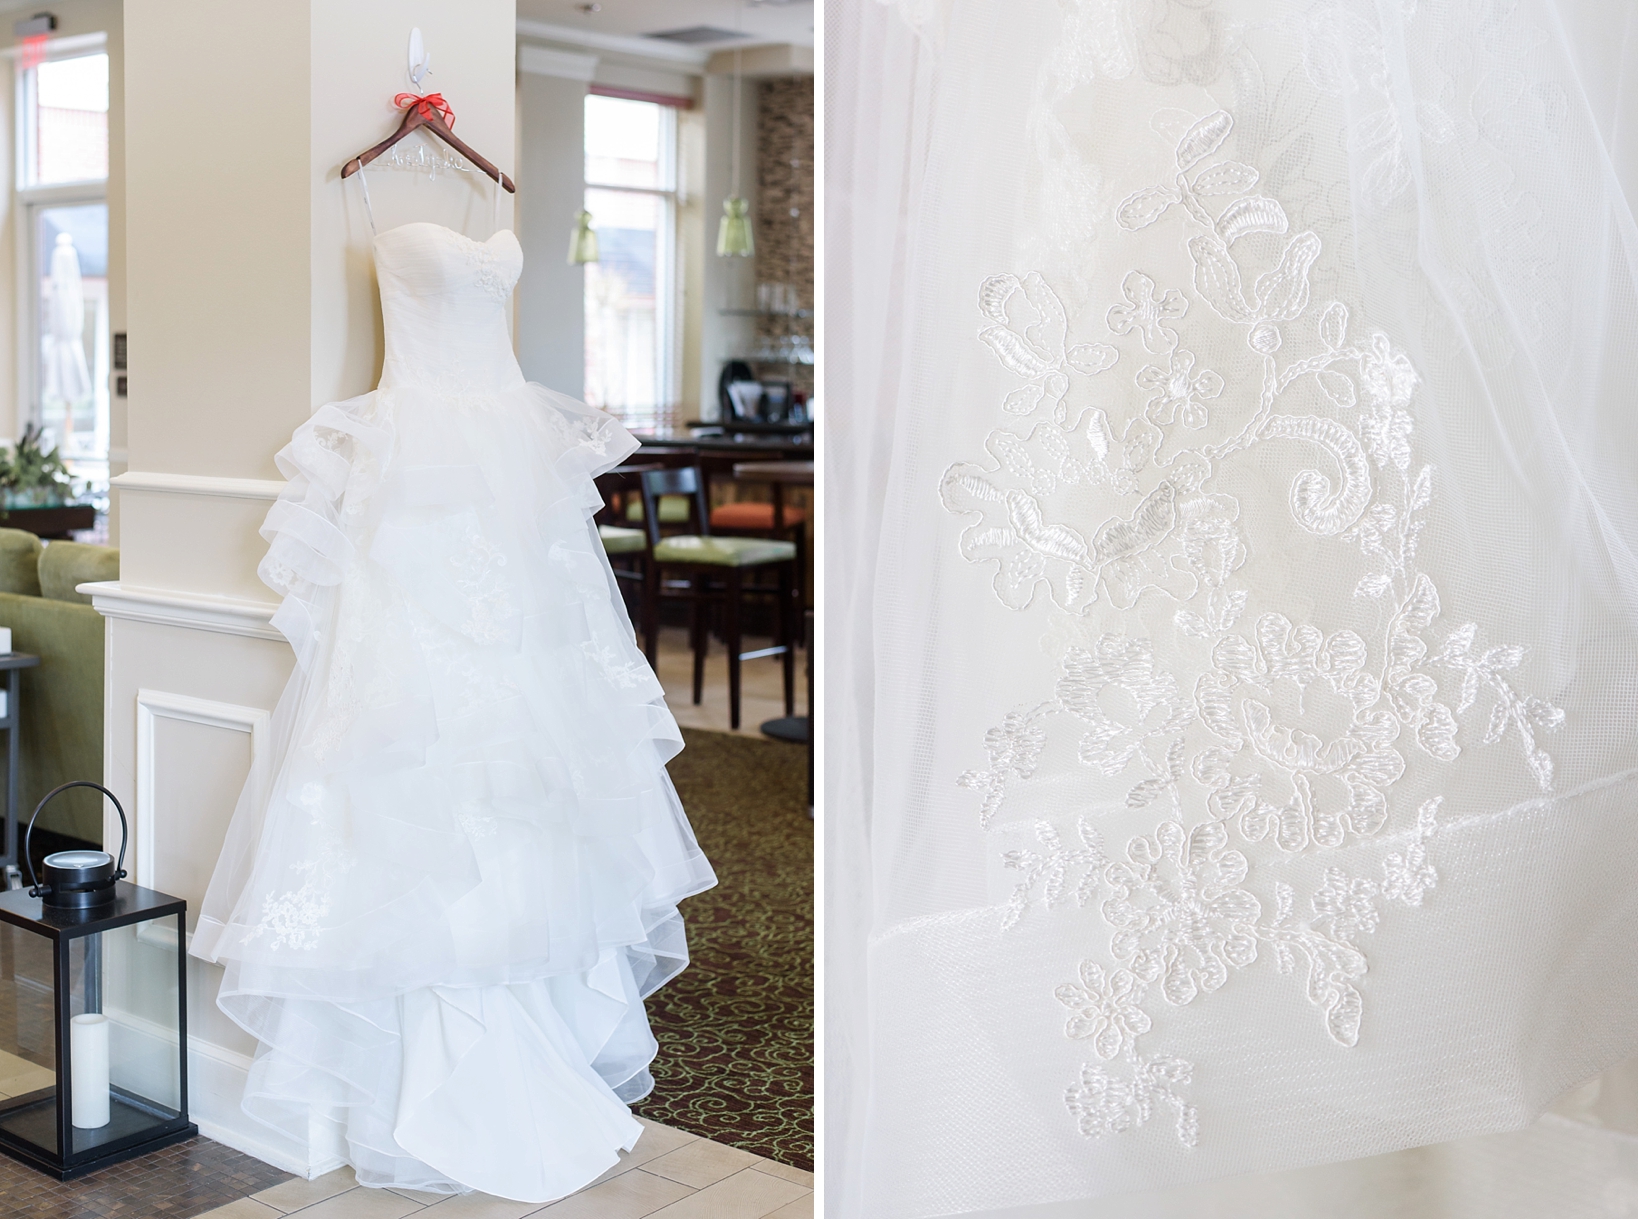 The wedding dress with small lace details throughout